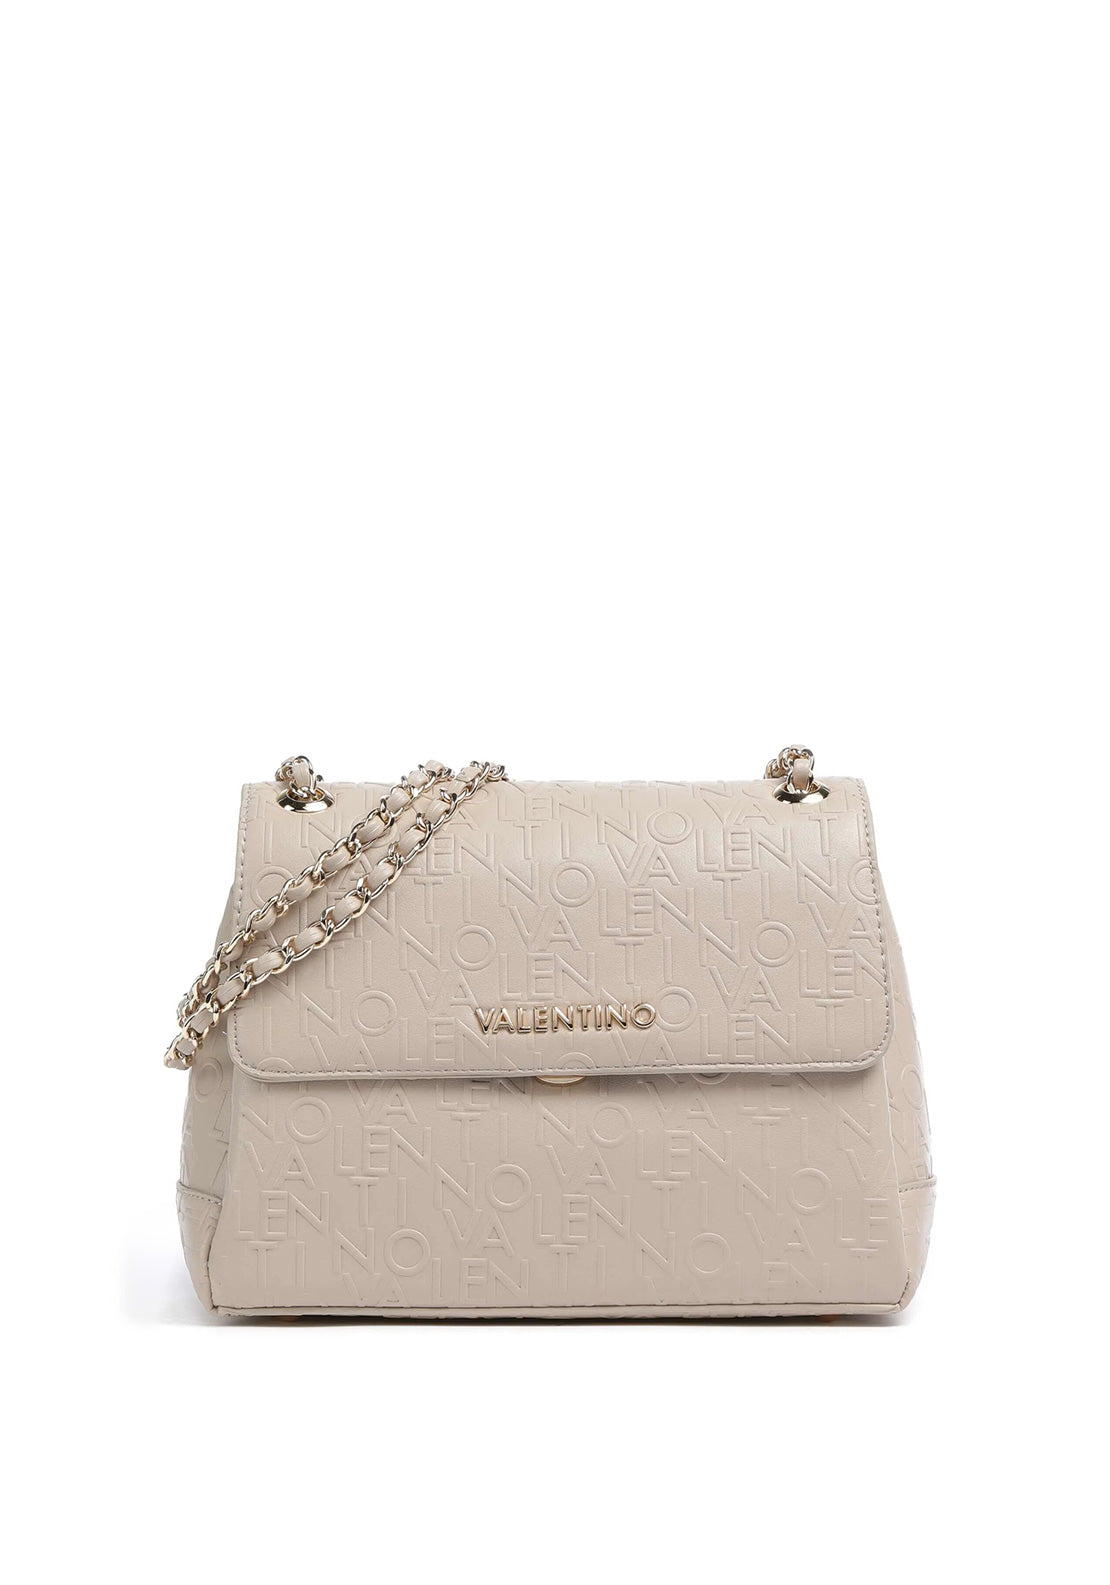 Valentino Bags Relax Crossbody Embossed Bag in beige-Neutral